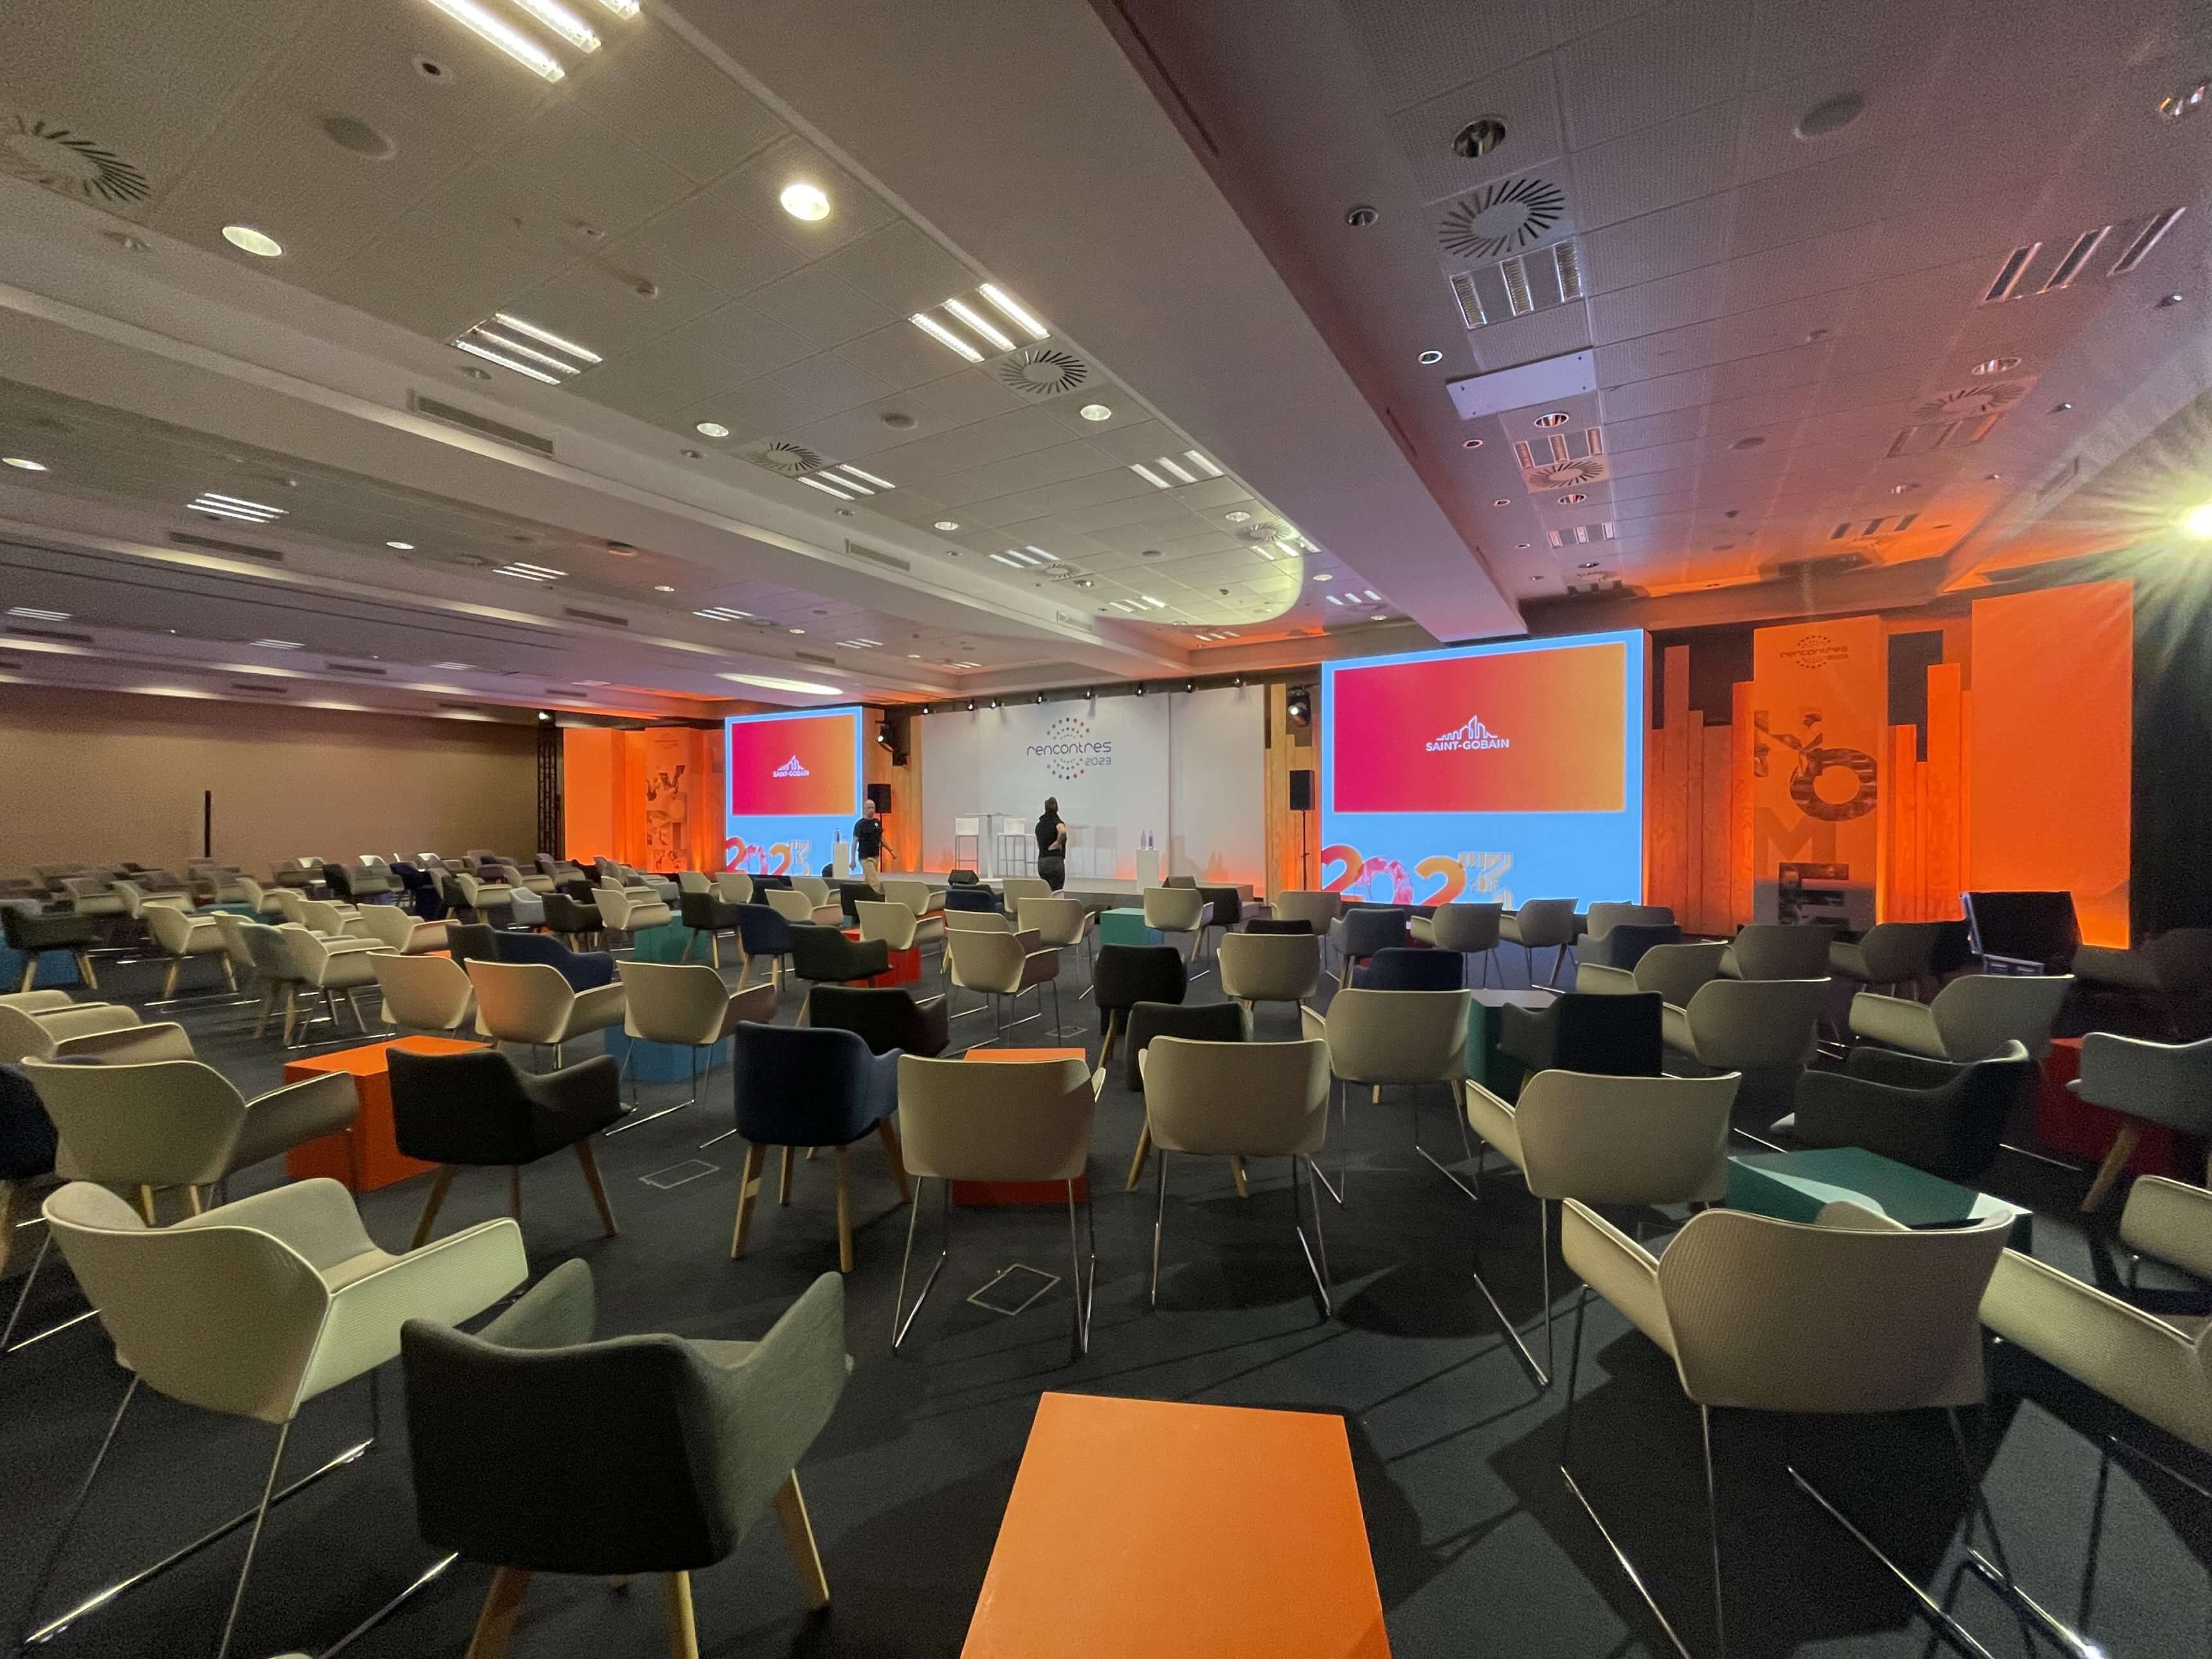 EGG events - Agency - Case story : Saint-Gobain event installation